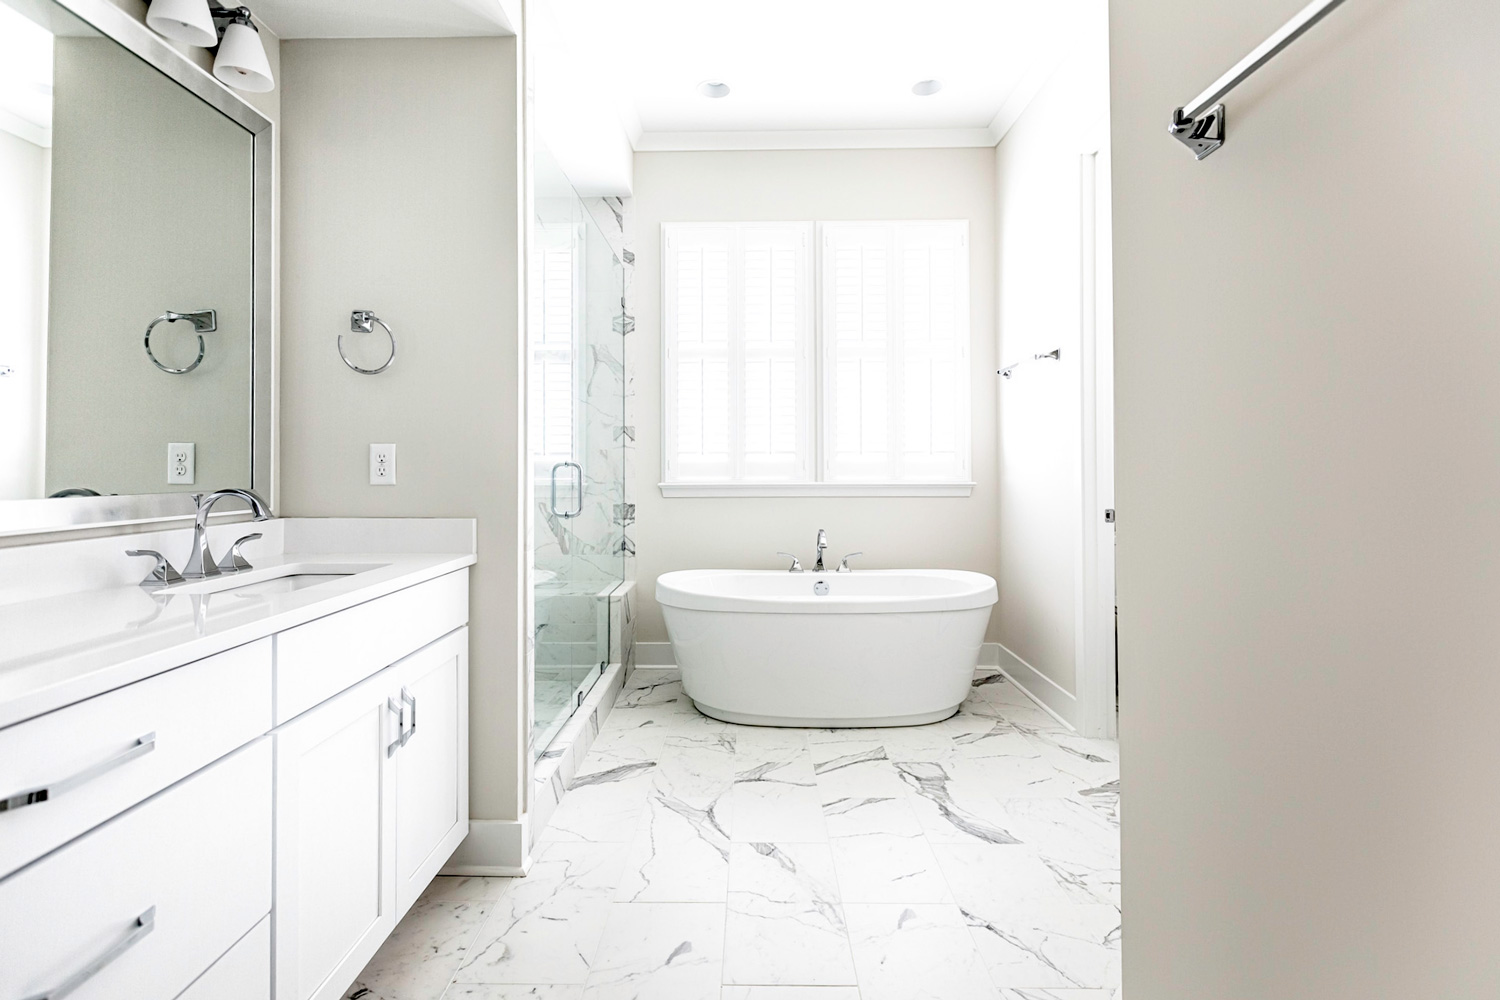 Porcelain Vs Ceramic Tile Which Is The, Which Is Better In A Bathroom Porcelain Or Ceramic Tile